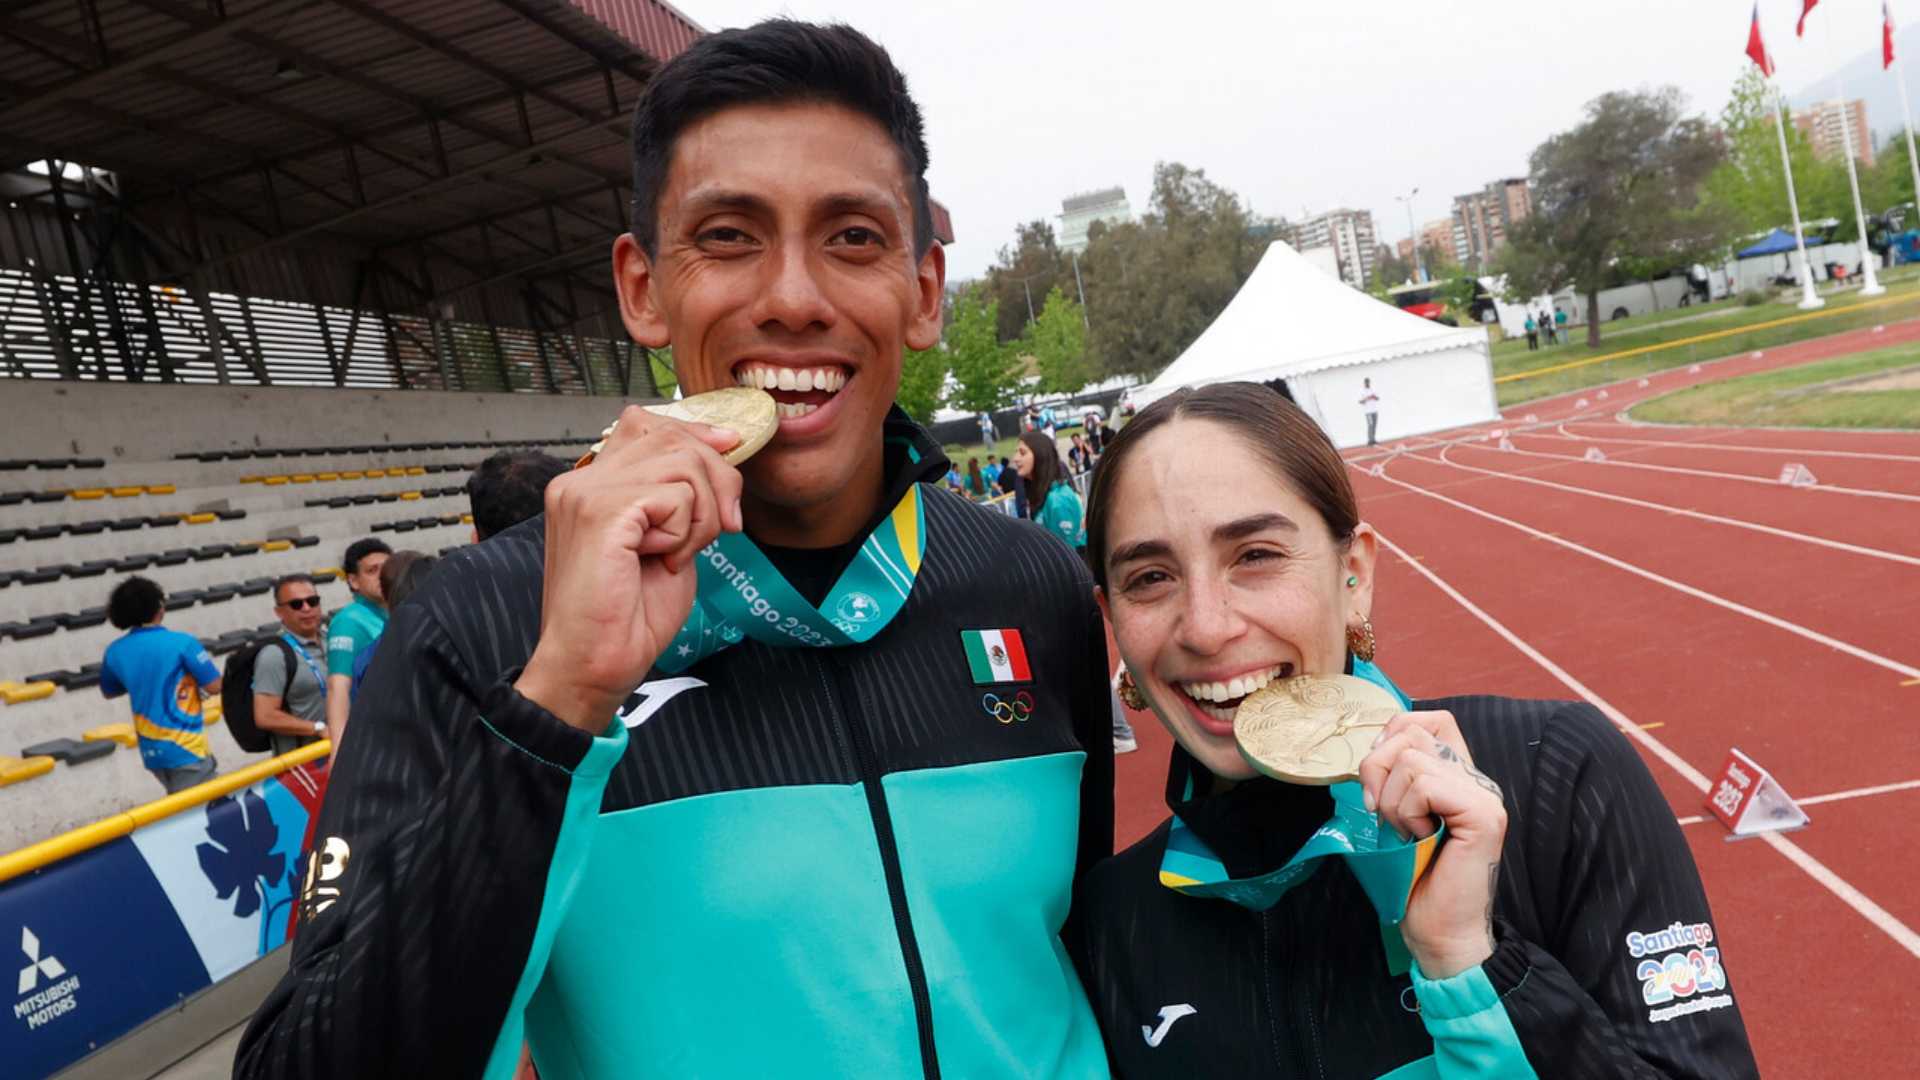 Mexico sweeps modern pentathlon, takes gold in mixed relays